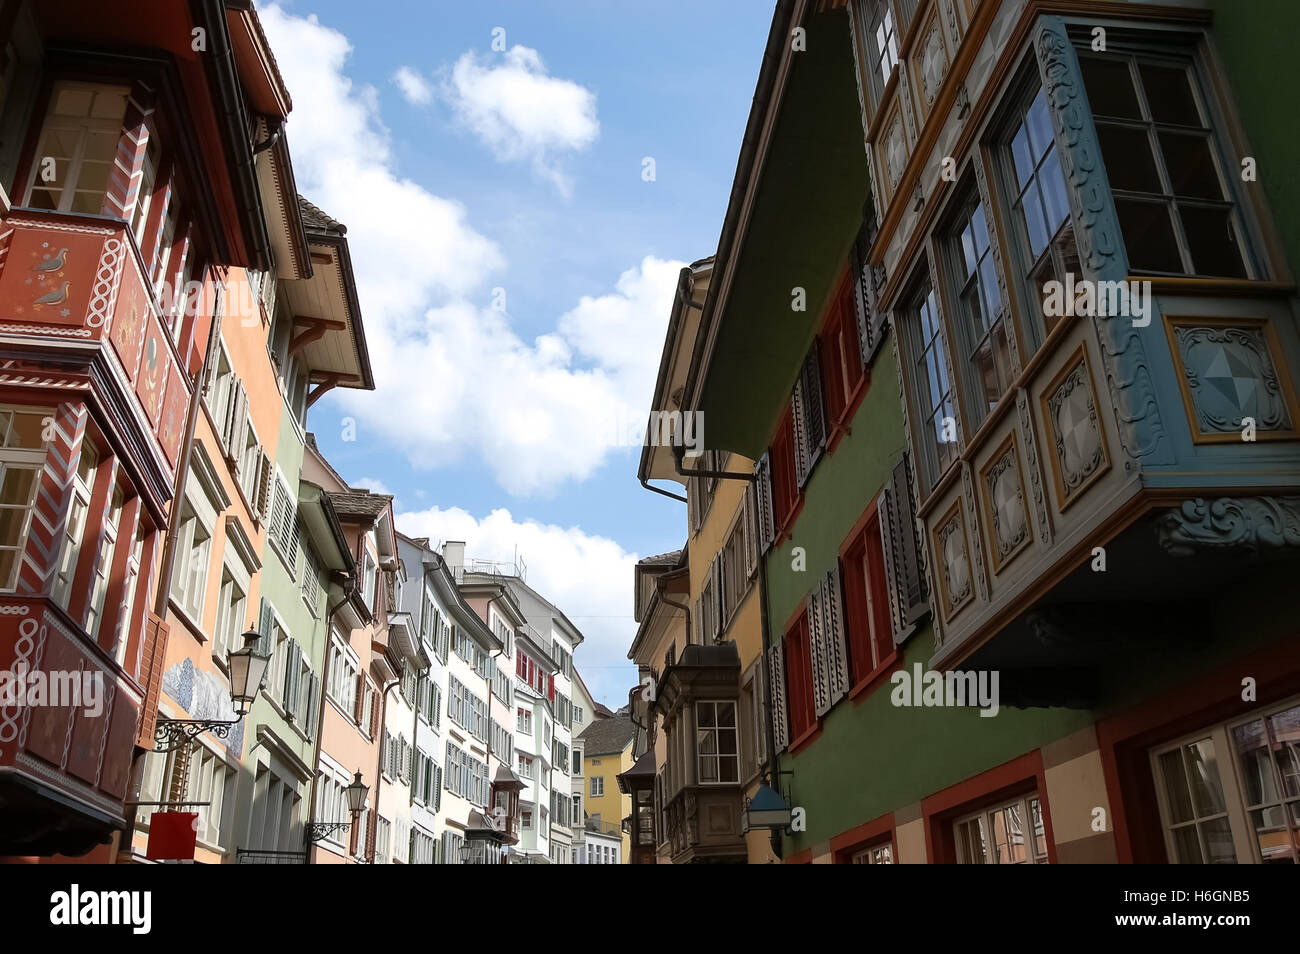 Street view with old houses in the Swiss city. Stock Photo